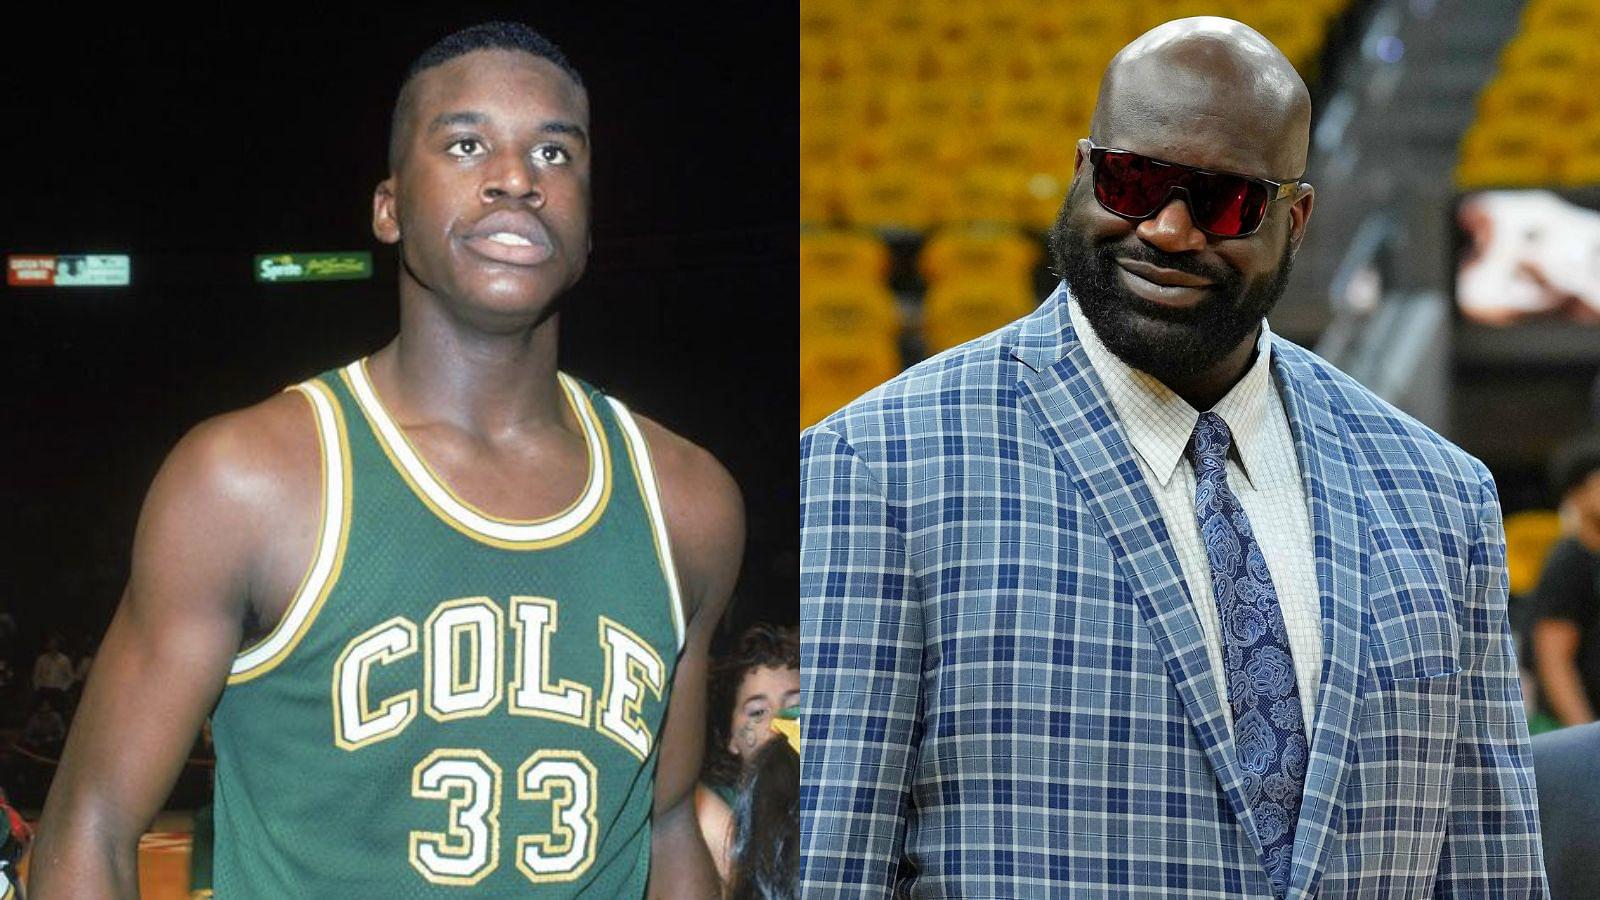 Shaquille O’Neal Turned 7-foot Tall at 14 Years of Age as a Sophomore in High School